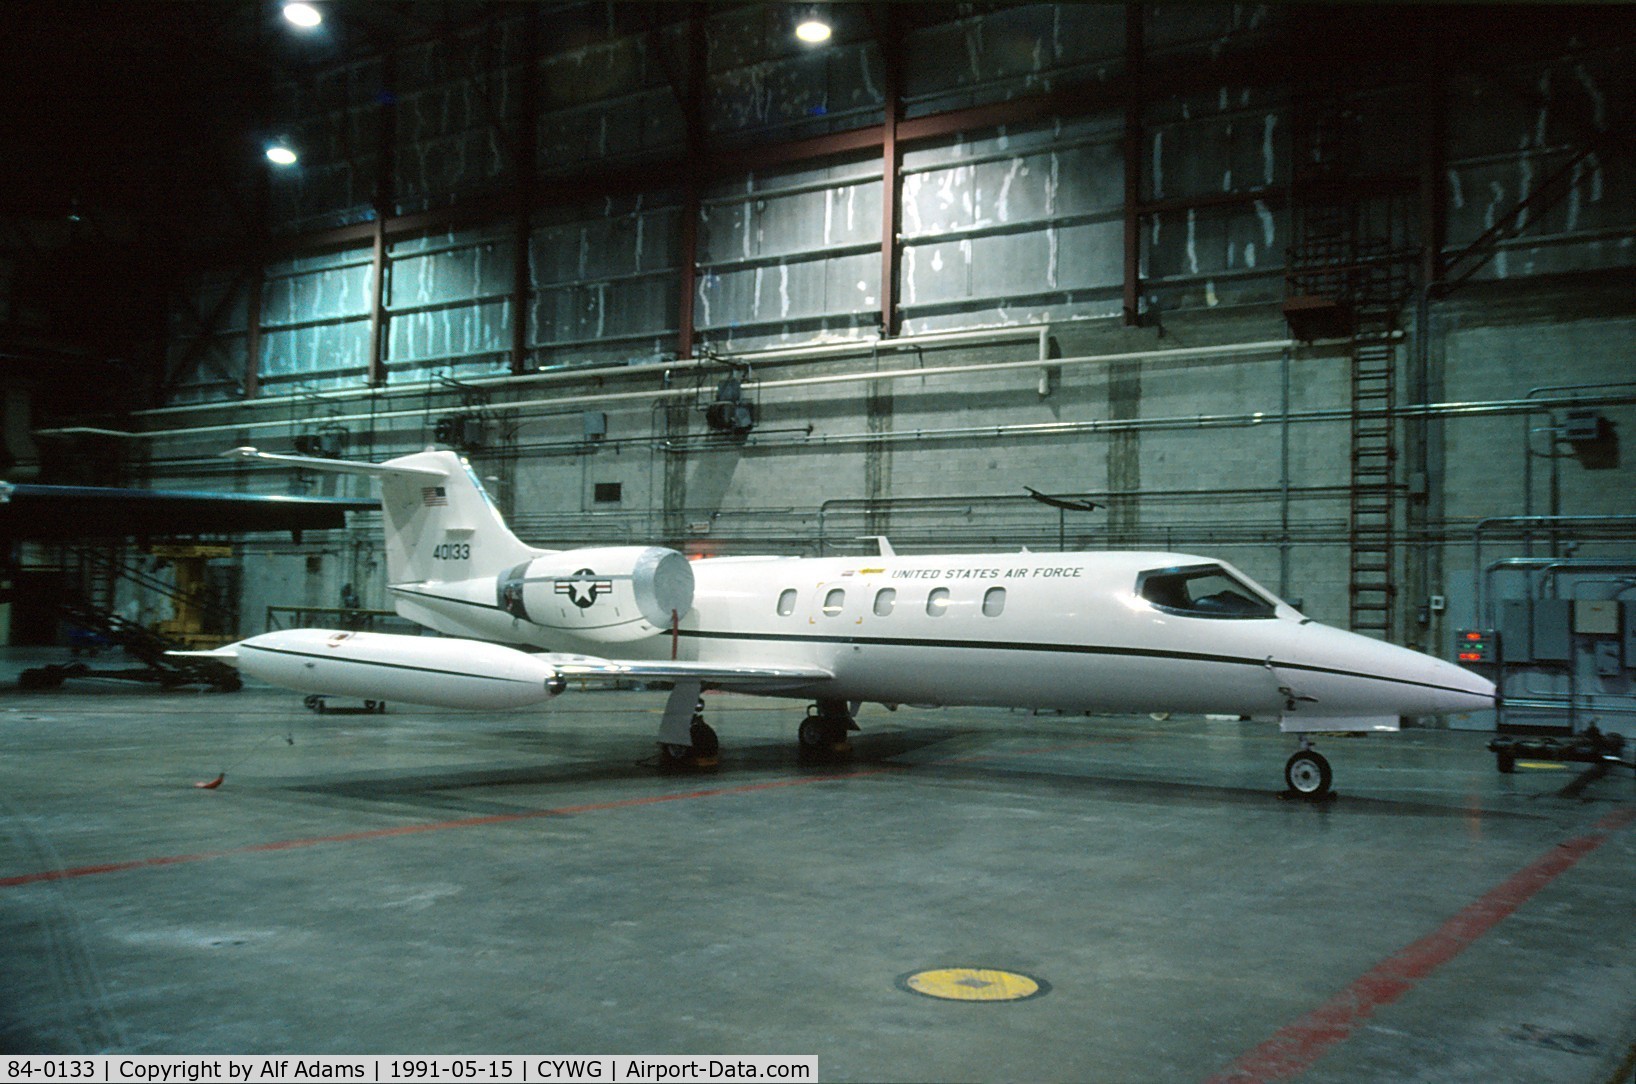 84-0133, 1984 Gates Learjet C-21A C/N 35A-580, Stopover at Winnipeg, Manitoba, Canada in 1991.